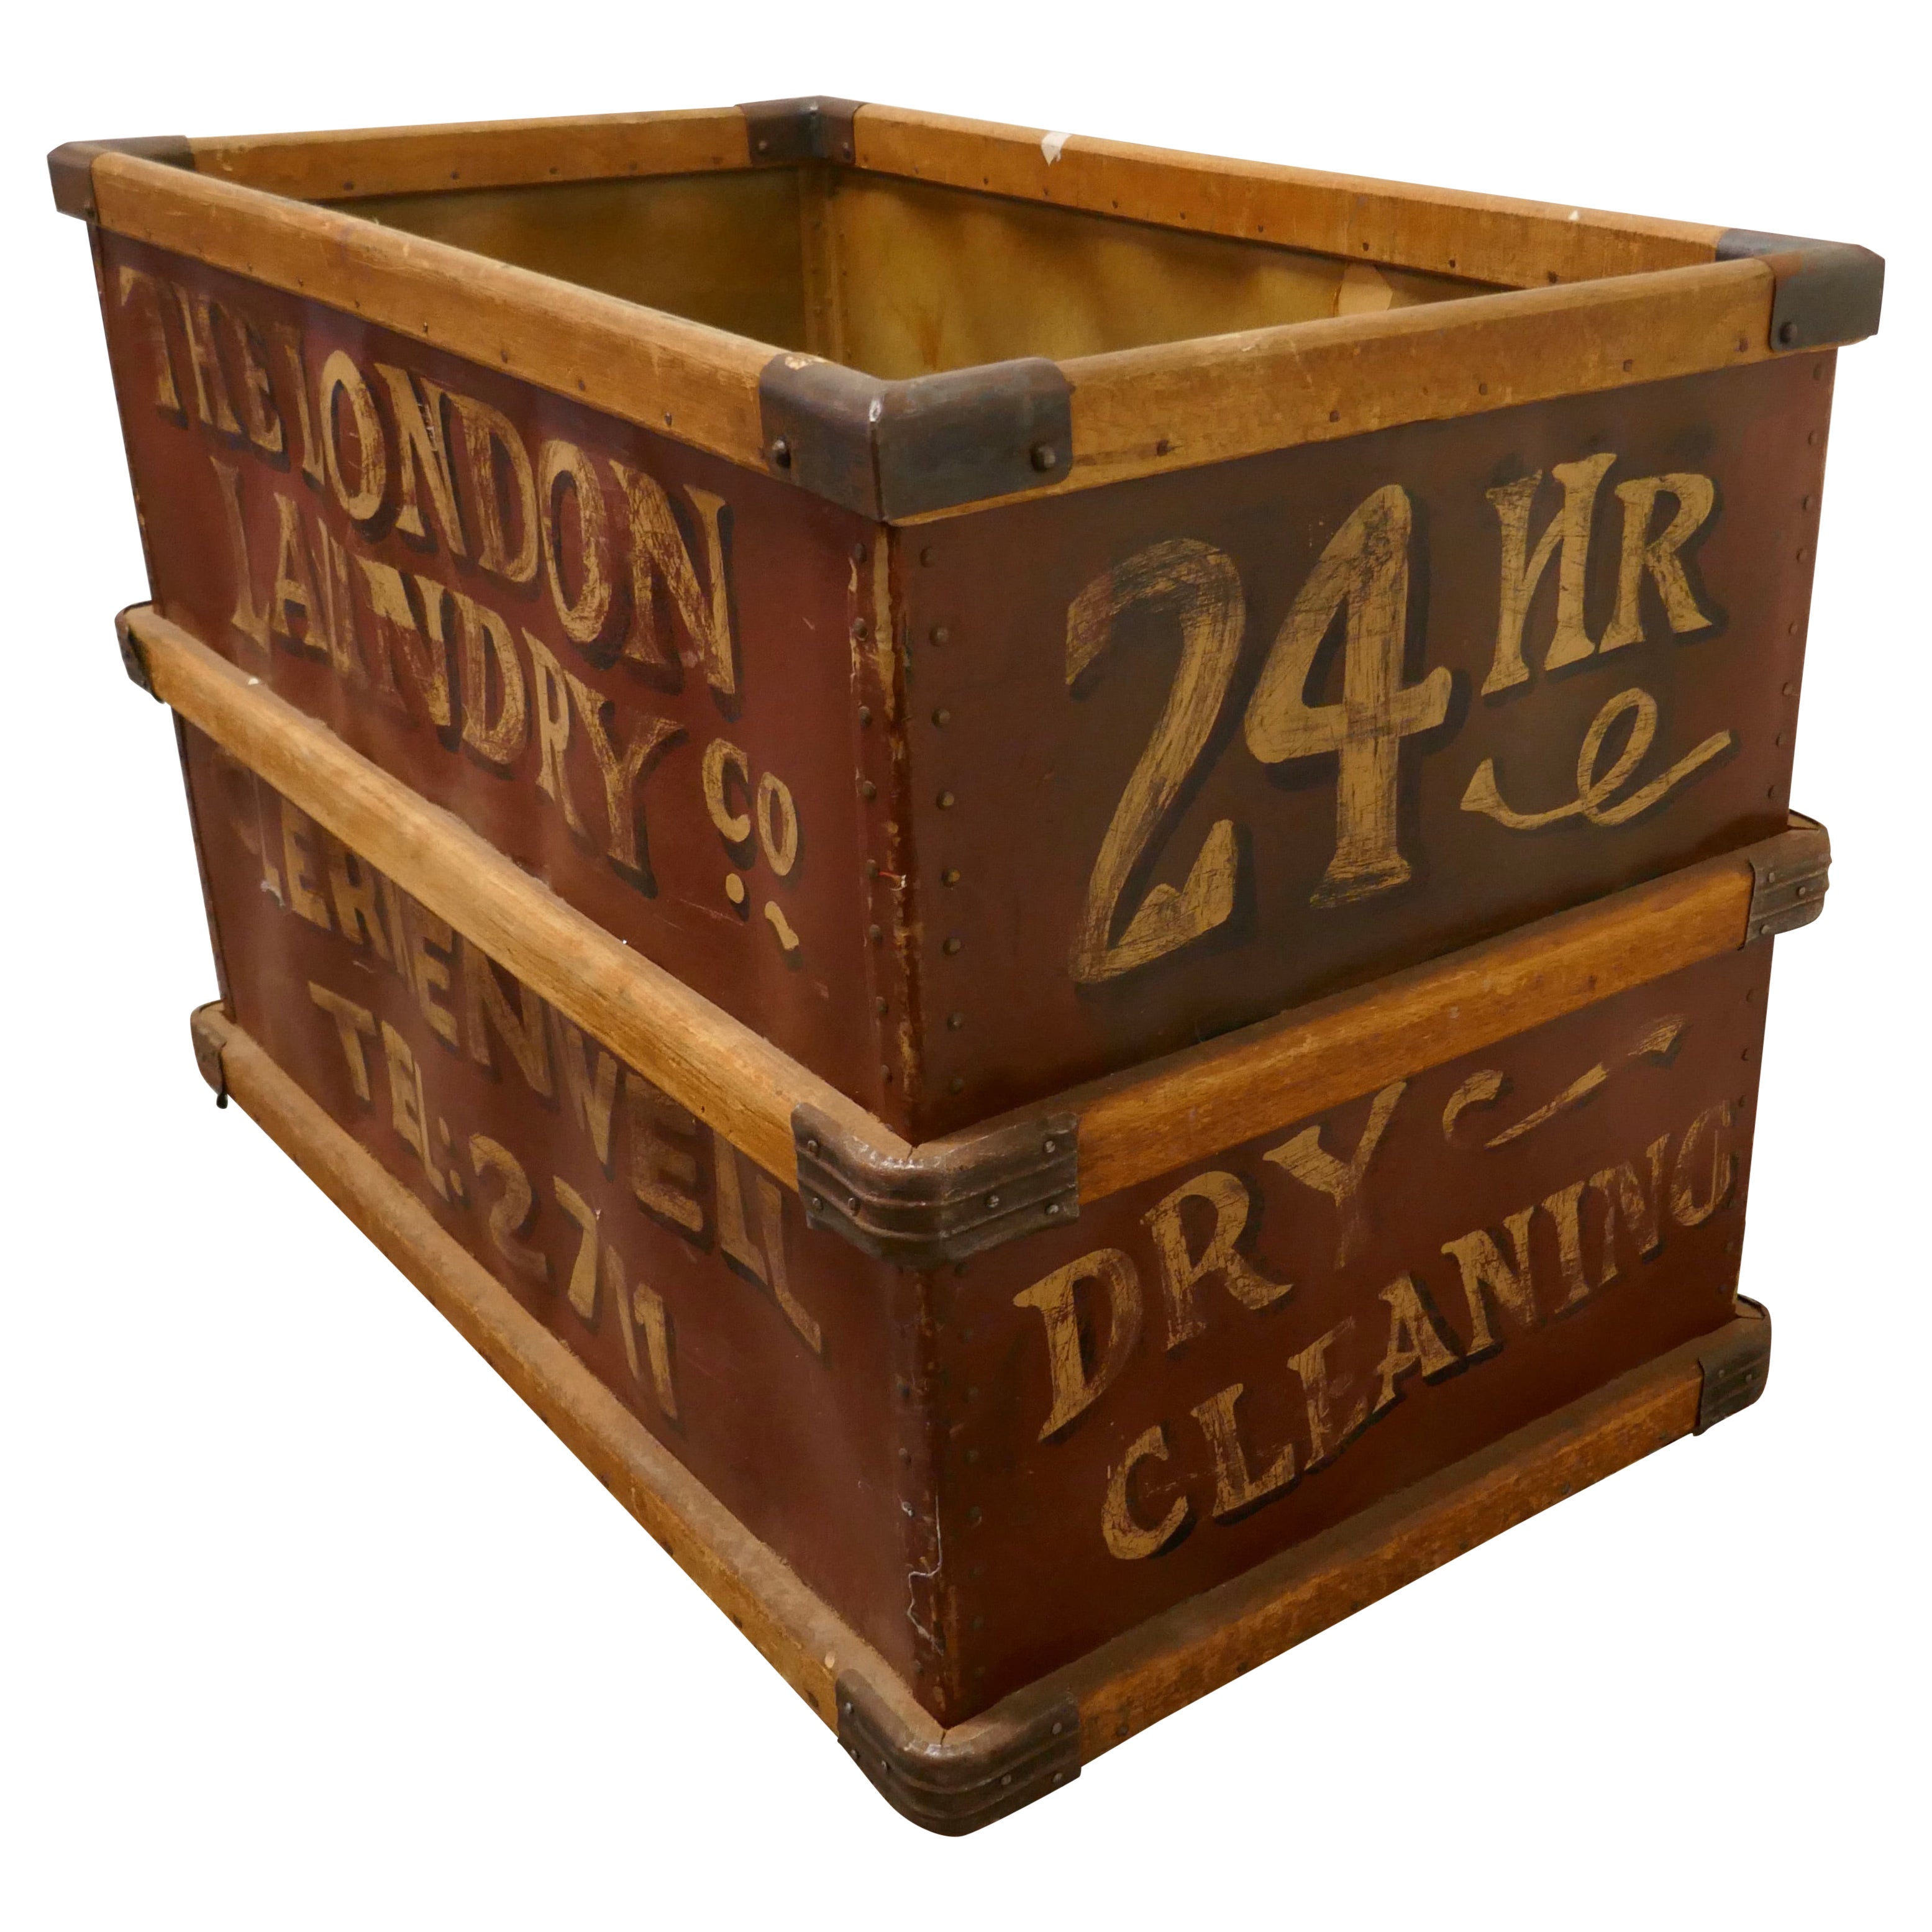 London Laundry Co. Industrial Trolley Cart   Great piece from the London Laundry For Sale